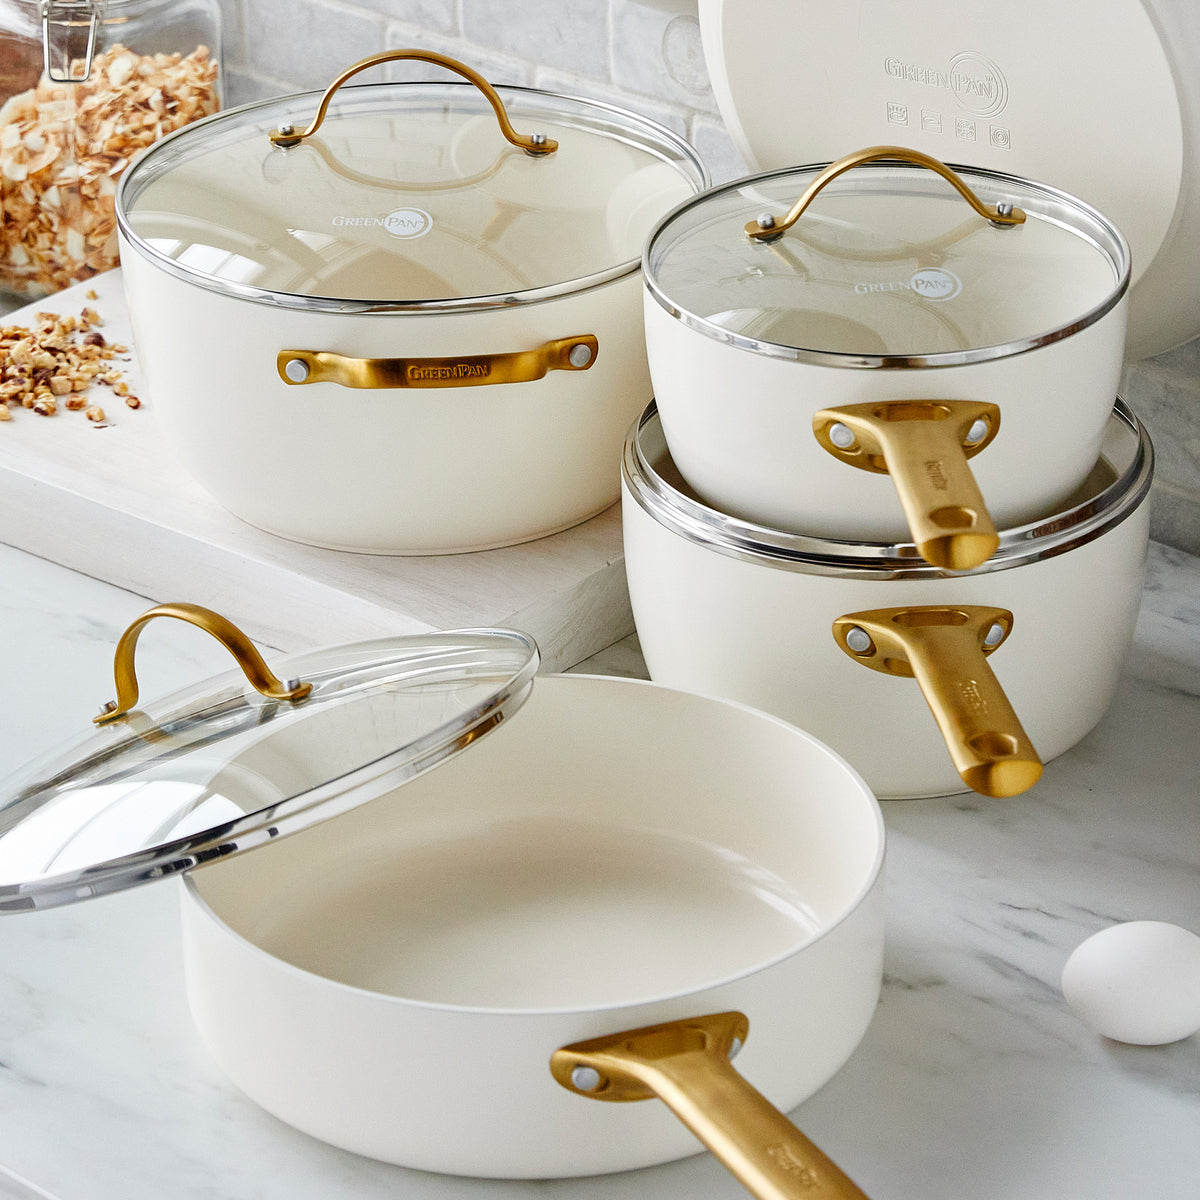 Reserve Ceramic Nonstick 10-Piece Cookware Set | Taupe with Gold-Tone  Handles